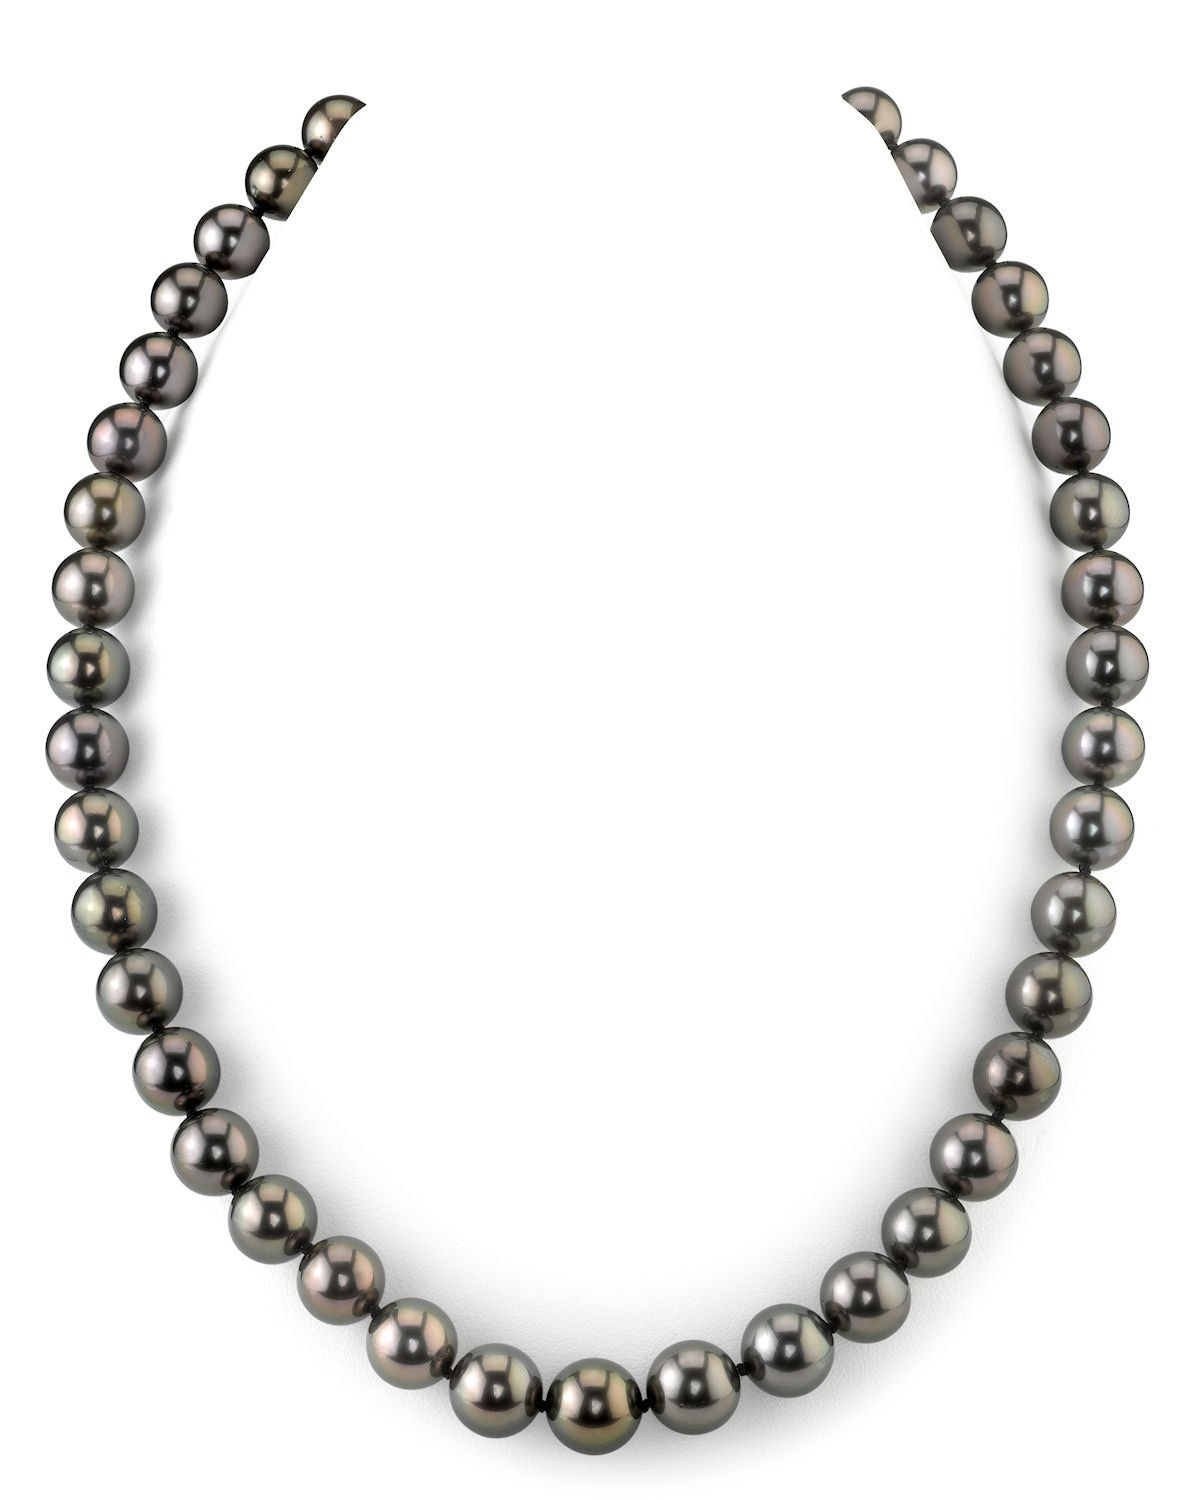 Amazon.com: Black pearl necklace, genuine 5mm black peacock pearls sterling  silver, strand of pearls, handmade, adjustable length : Handmade Products